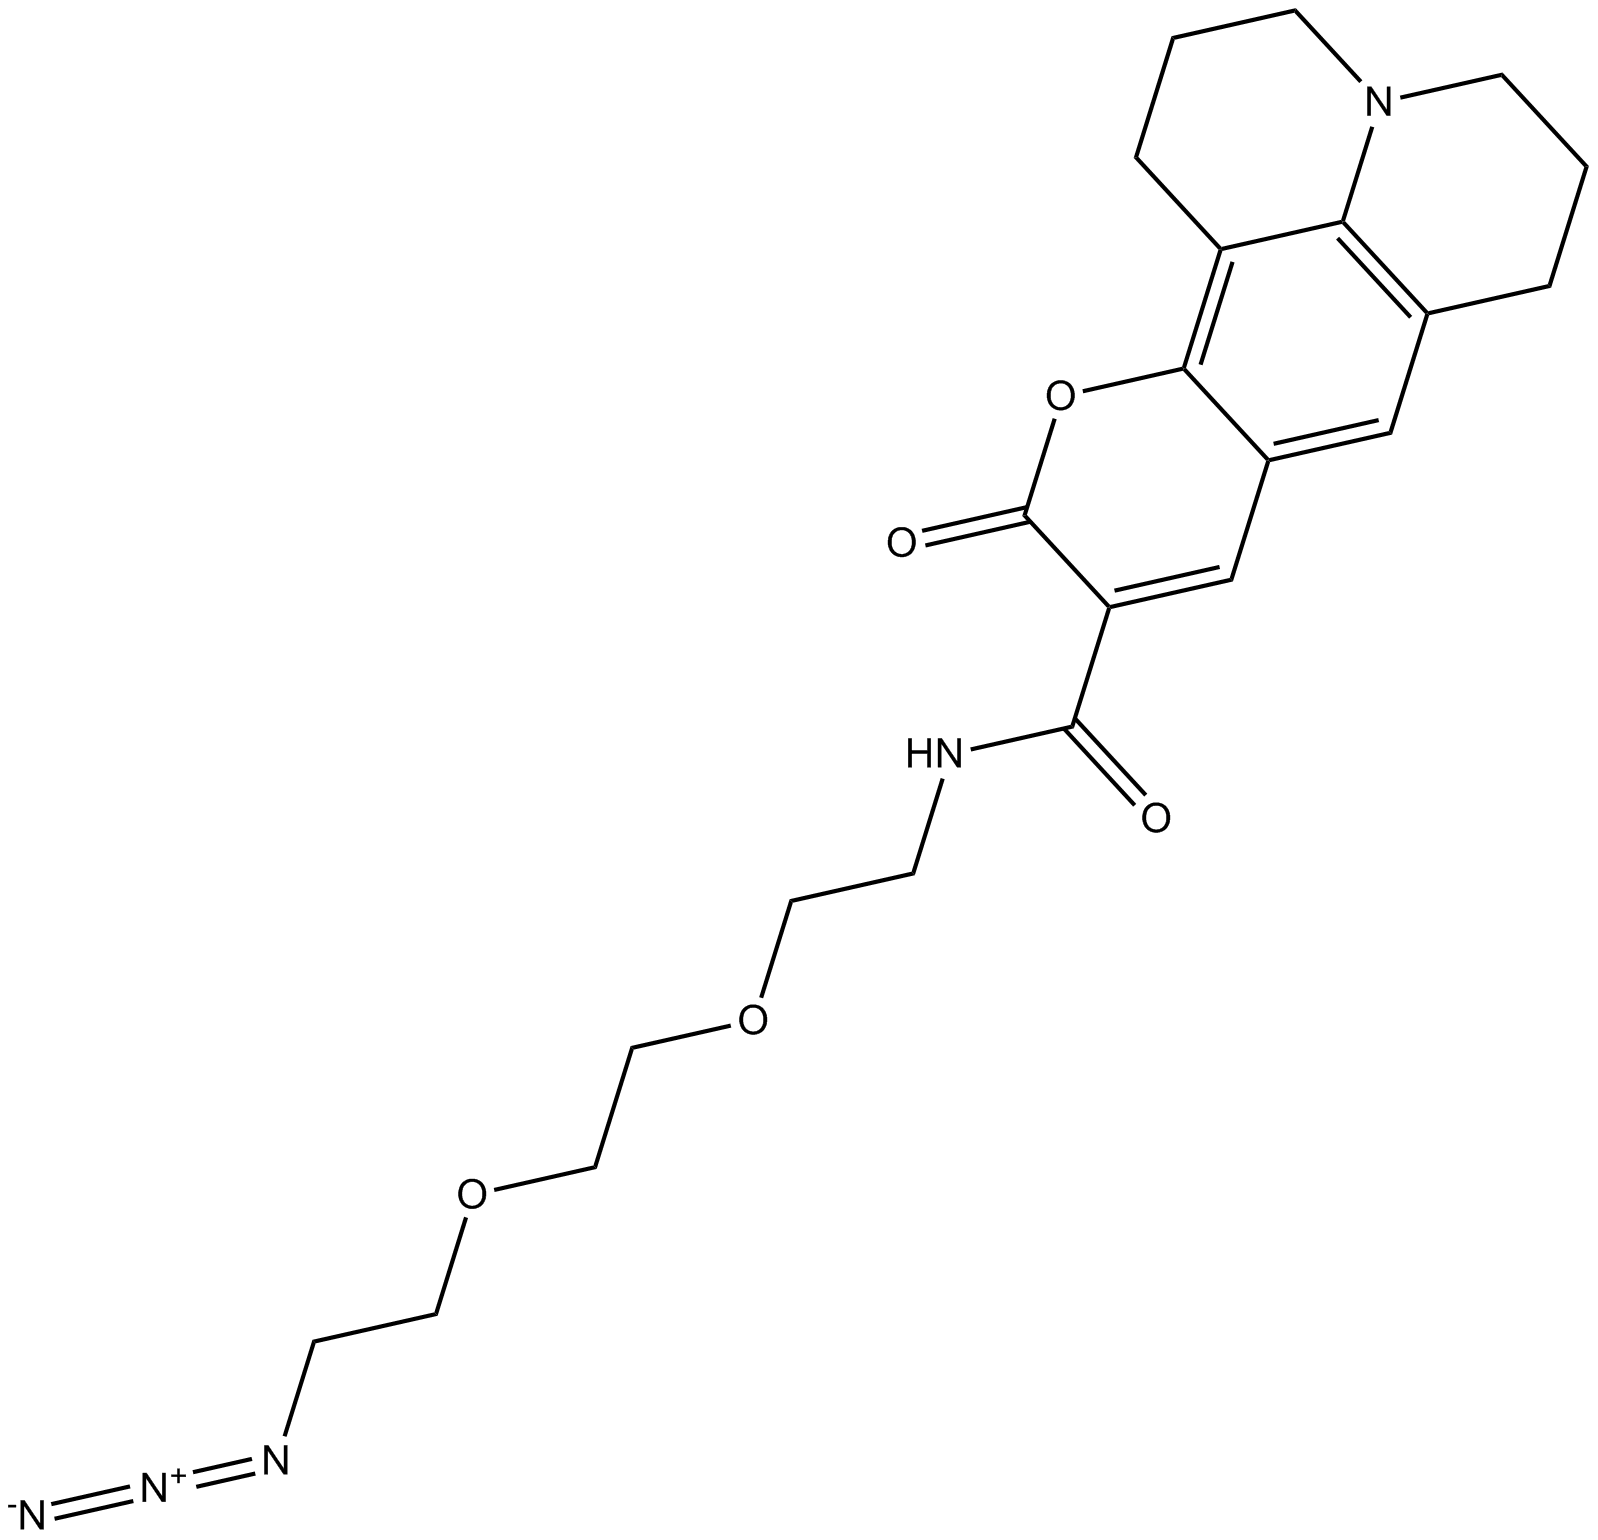 Coumarin 343 azide  Chemical Structure